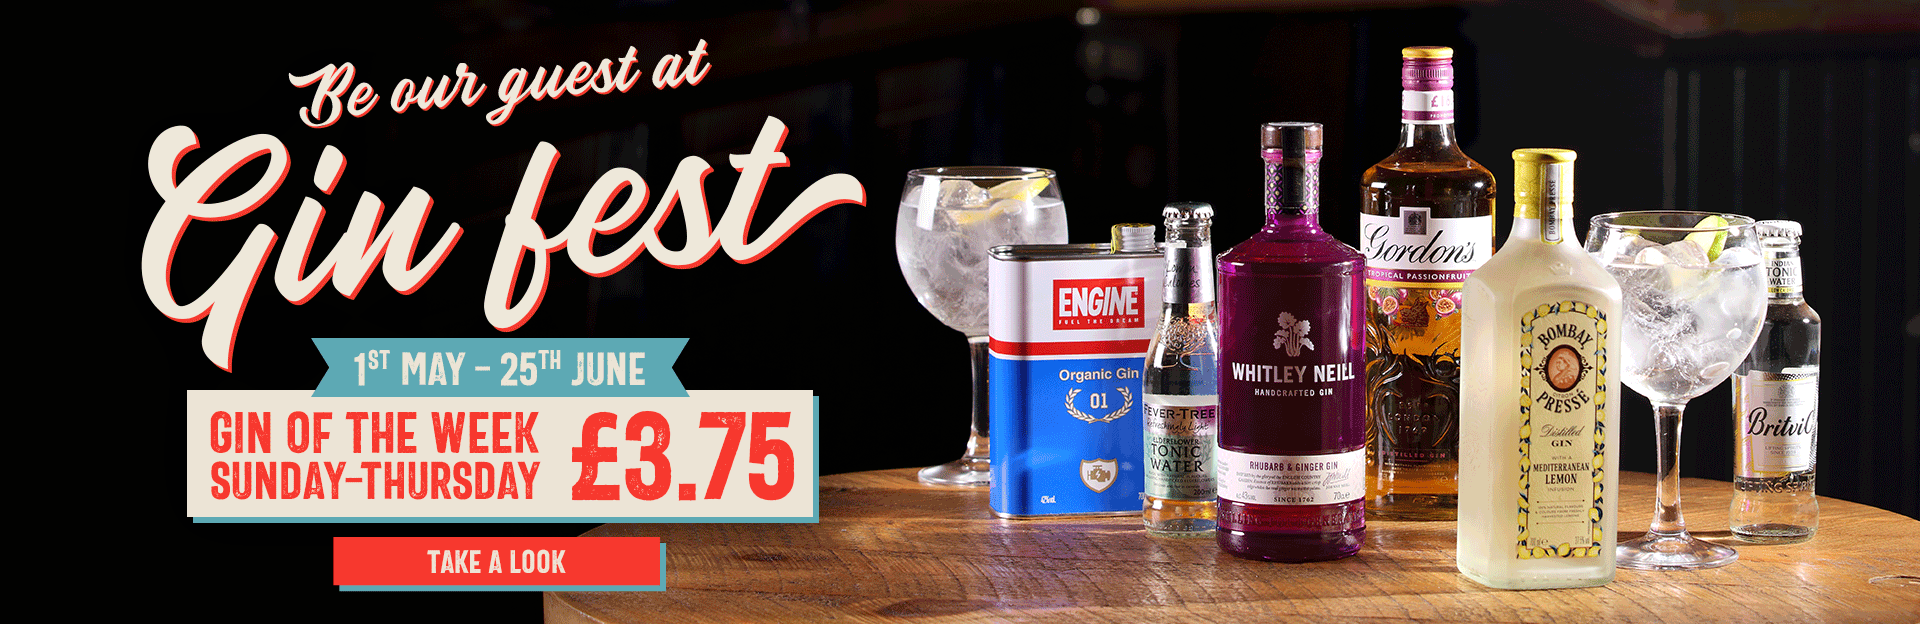 Gin Fest at The Piccadilly Tavern